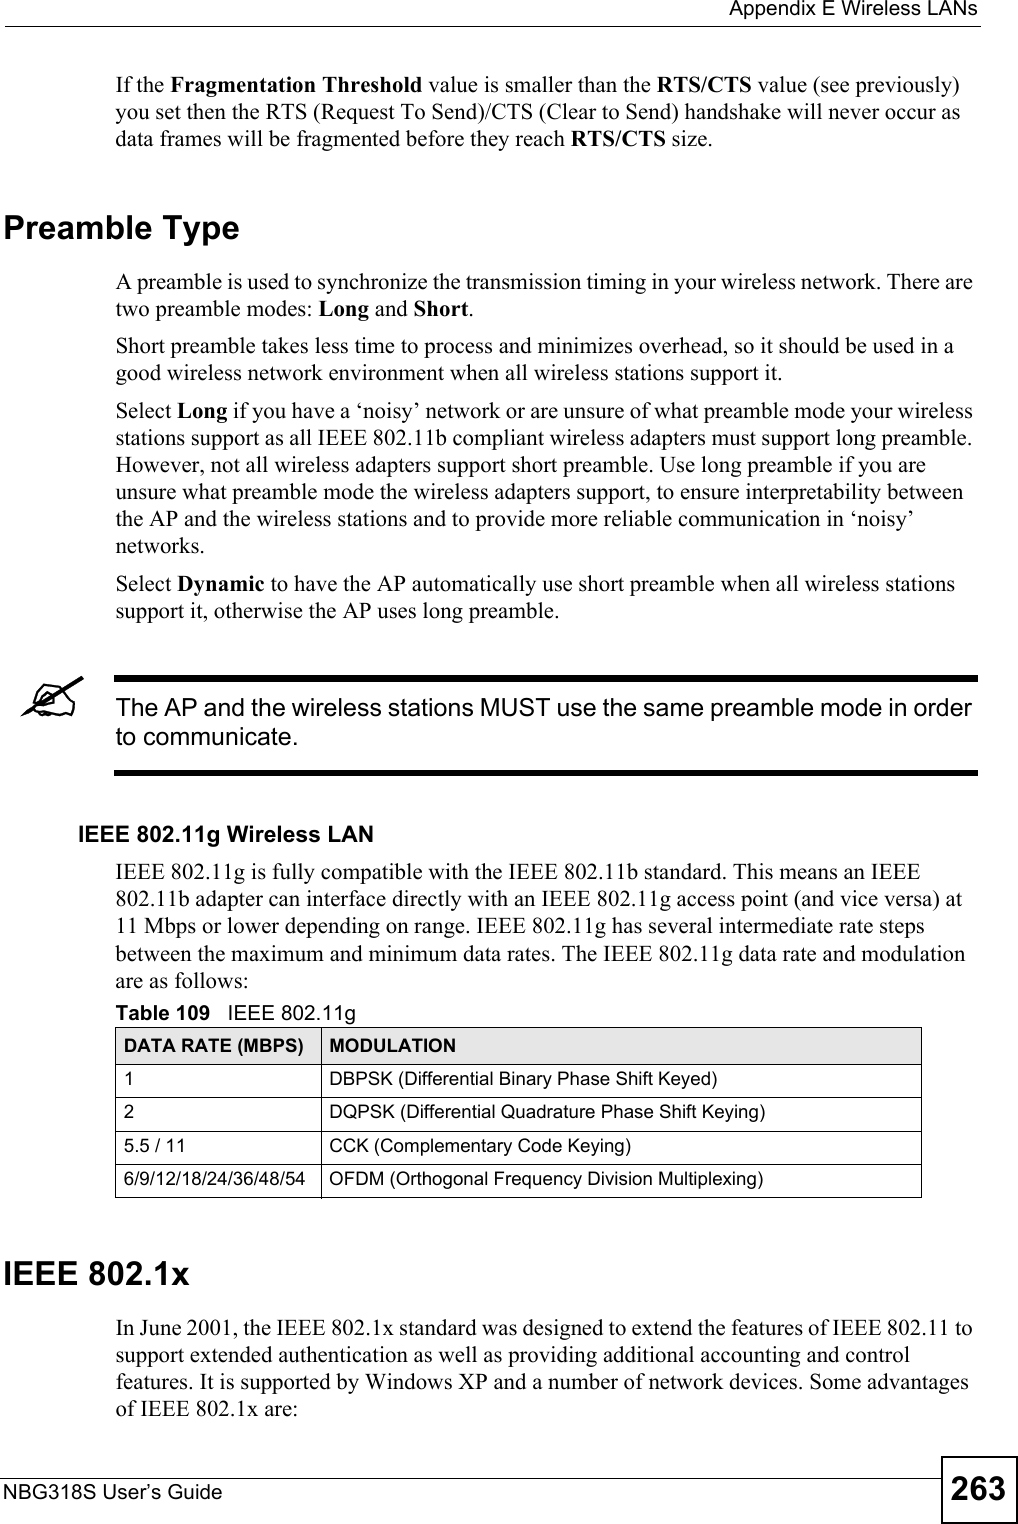  Appendix E Wireless LANsNBG318S User’s Guide 263If the Fragmentation Threshold value is smaller than the RTS/CTS value (see previously) you set then the RTS (Request To Send)/CTS (Clear to Send) handshake will never occur as data frames will be fragmented before they reach RTS/CTS size.Preamble TypeA preamble is used to synchronize the transmission timing in your wireless network. There are two preamble modes: Long and Short. Short preamble takes less time to process and minimizes overhead, so it should be used in a good wireless network environment when all wireless stations support it. Select Long if you have a ‘noisy’ network or are unsure of what preamble mode your wireless stations support as all IEEE 802.11b compliant wireless adapters must support long preamble. However, not all wireless adapters support short preamble. Use long preamble if you are unsure what preamble mode the wireless adapters support, to ensure interpretability between the AP and the wireless stations and to provide more reliable communication in ‘noisy’ networks. Select Dynamic to have the AP automatically use short preamble when all wireless stations support it, otherwise the AP uses long preamble.&quot;The AP and the wireless stations MUST use the same preamble mode in order to communicate.IEEE 802.11g Wireless LANIEEE 802.11g is fully compatible with the IEEE 802.11b standard. This means an IEEE 802.11b adapter can interface directly with an IEEE 802.11g access point (and vice versa) at 11 Mbps or lower depending on range. IEEE 802.11g has several intermediate rate steps between the maximum and minimum data rates. The IEEE 802.11g data rate and modulation are as follows:IEEE 802.1xIn June 2001, the IEEE 802.1x standard was designed to extend the features of IEEE 802.11 to support extended authentication as well as providing additional accounting and control features. It is supported by Windows XP and a number of network devices. Some advantages of IEEE 802.1x are:Table 109   IEEE 802.11gDATA RATE (MBPS) MODULATION1 DBPSK (Differential Binary Phase Shift Keyed)2 DQPSK (Differential Quadrature Phase Shift Keying)5.5 / 11 CCK (Complementary Code Keying) 6/9/12/18/24/36/48/54 OFDM (Orthogonal Frequency Division Multiplexing) 